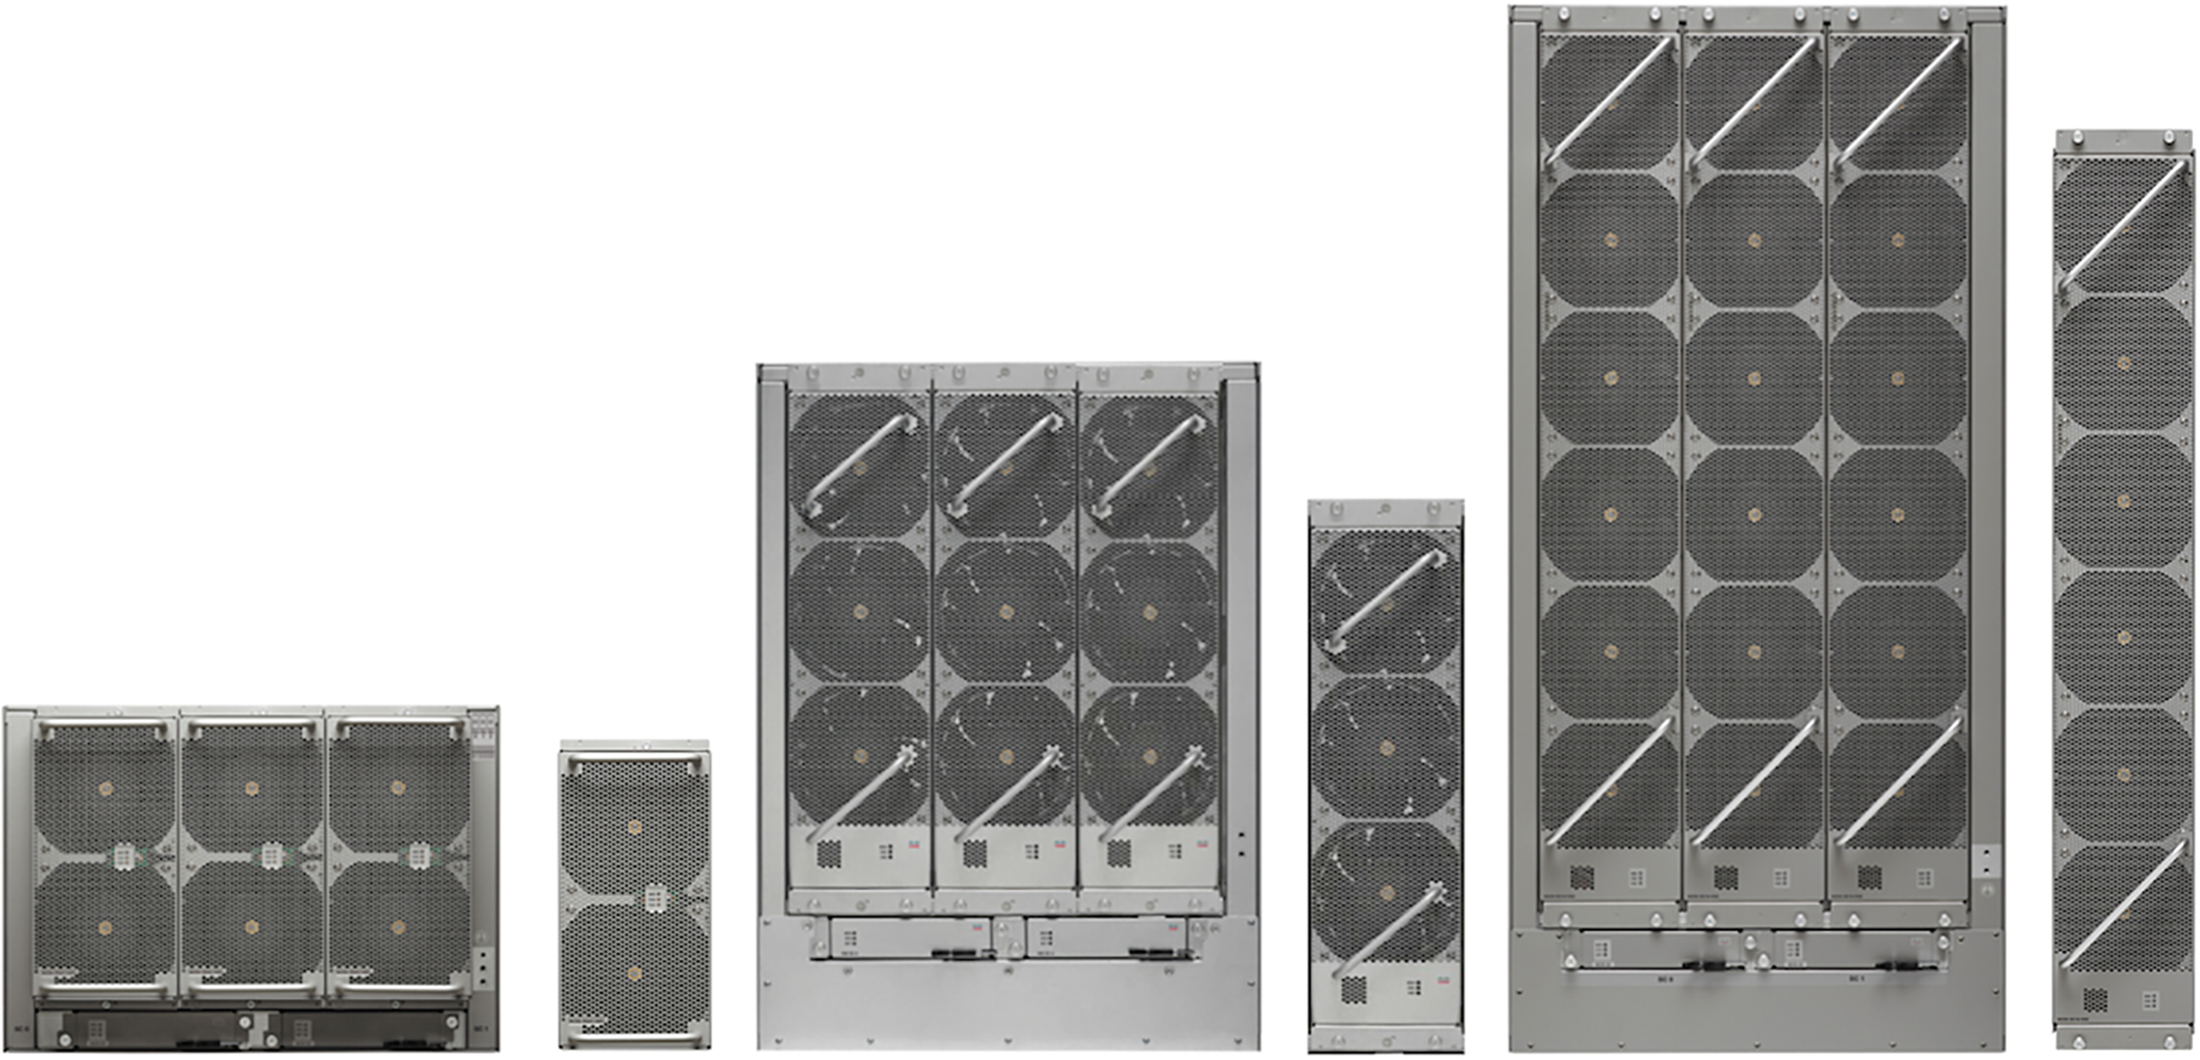 NCS 5504, NCS 5508, and NCS 5516 fan trays